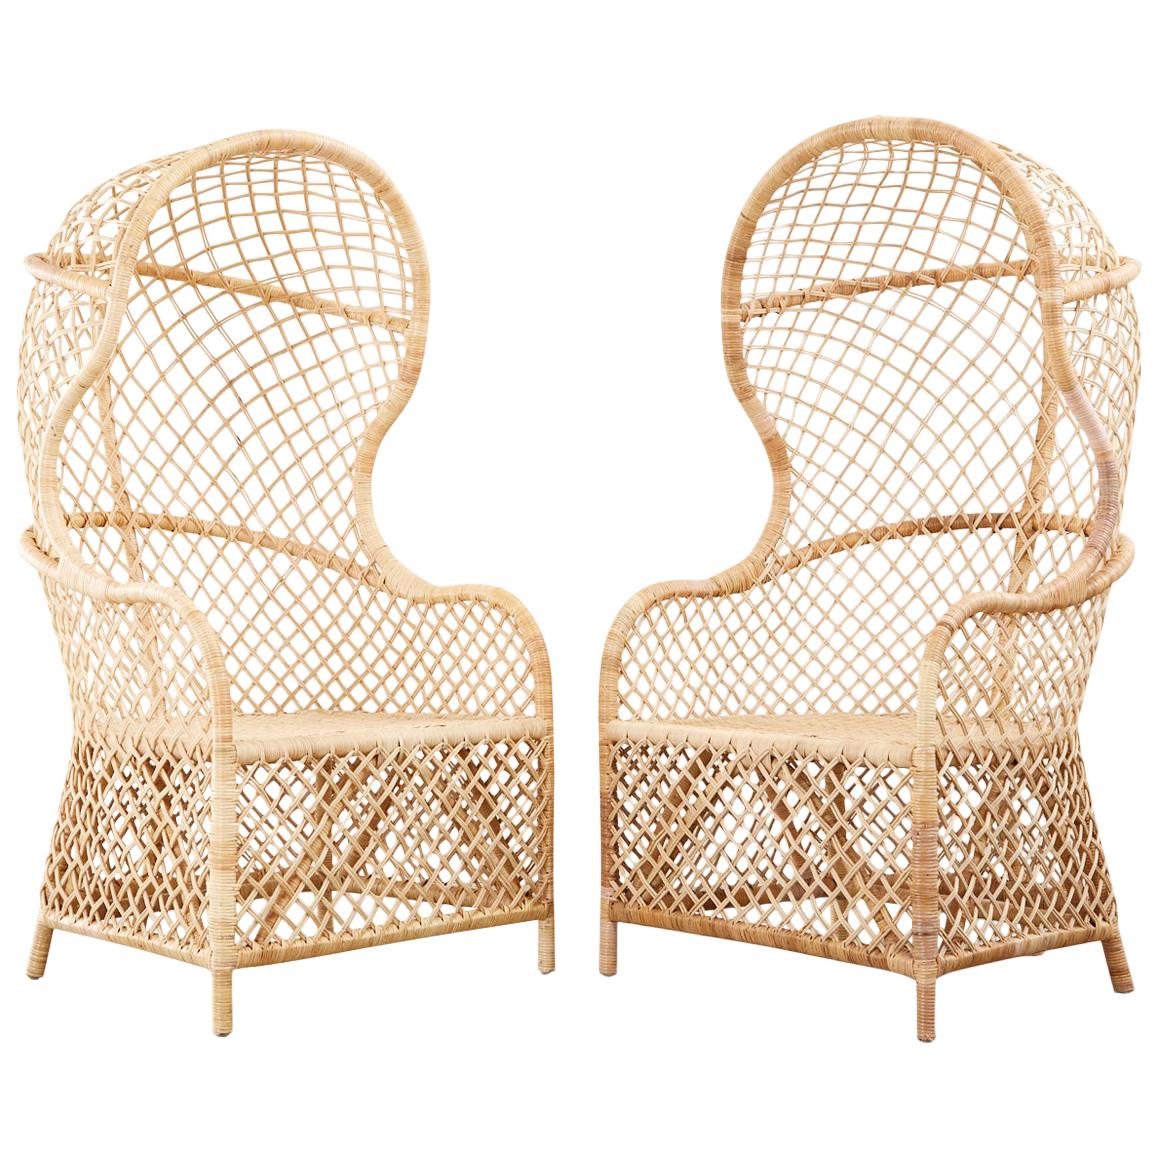 Pair of Rattan and Wicker Hooded Porters Chairs